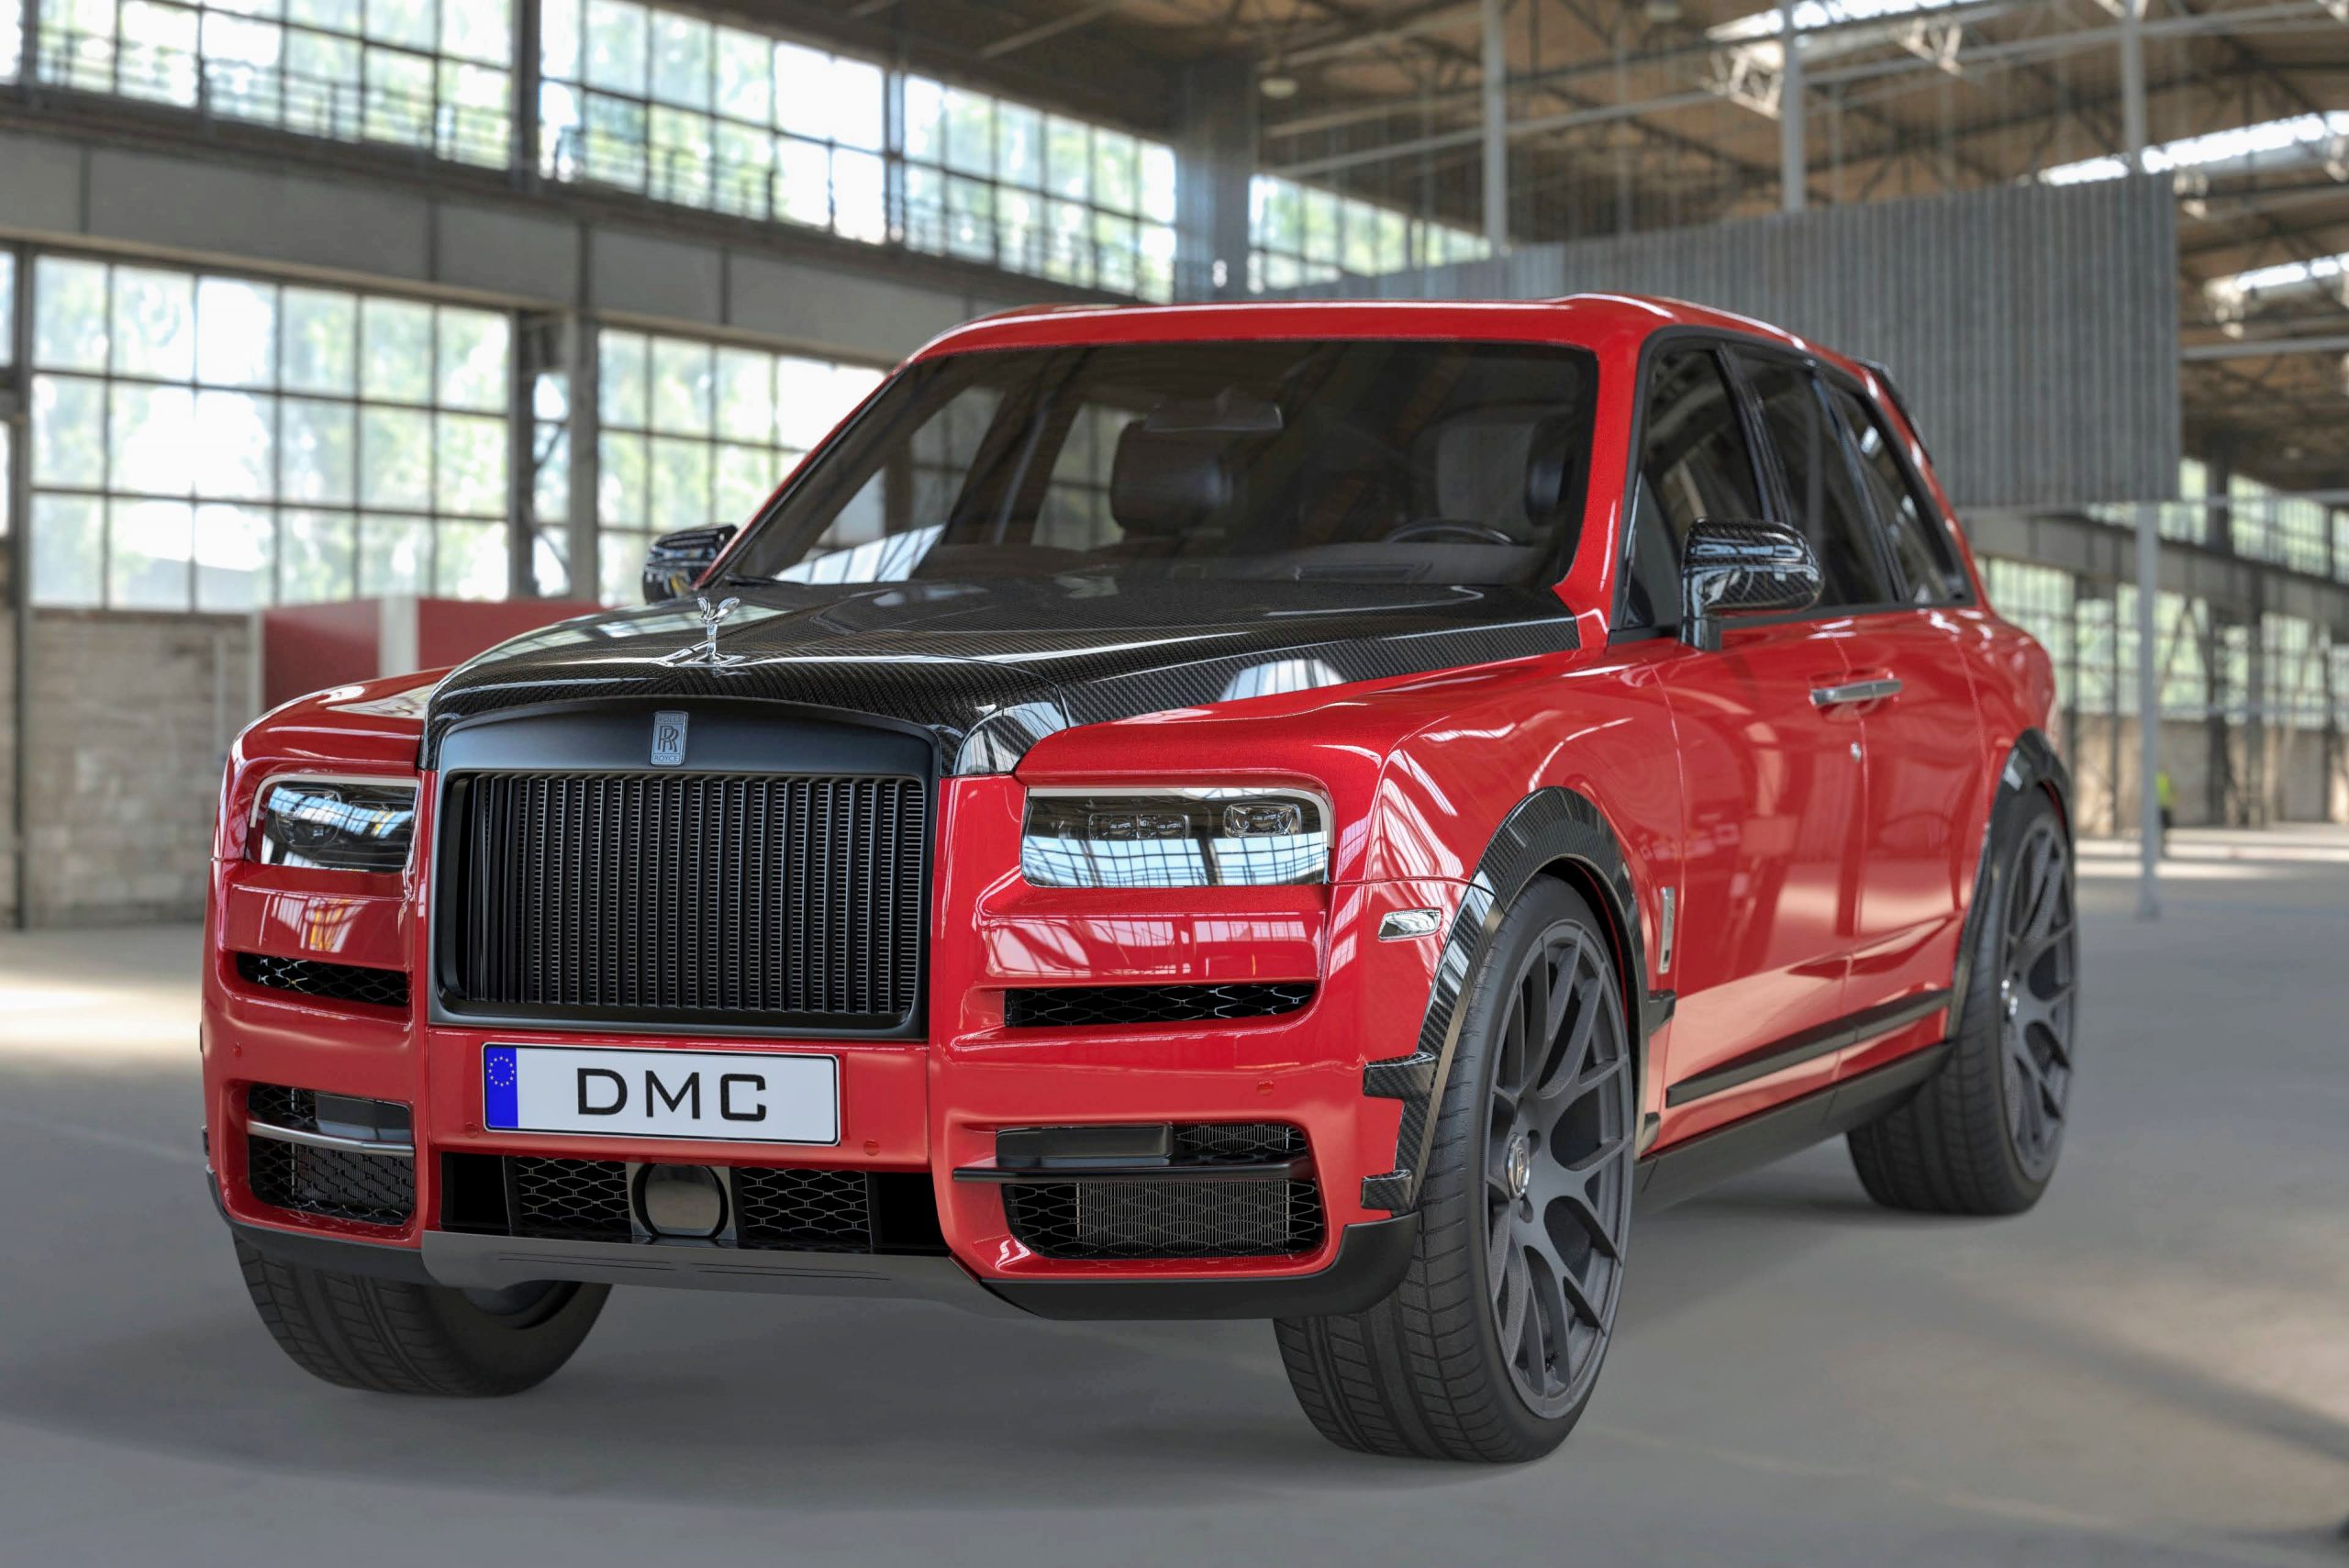 Rolls Royce Cullinan Wide Body Modified: Front View: Carbon Fiber Front Hood